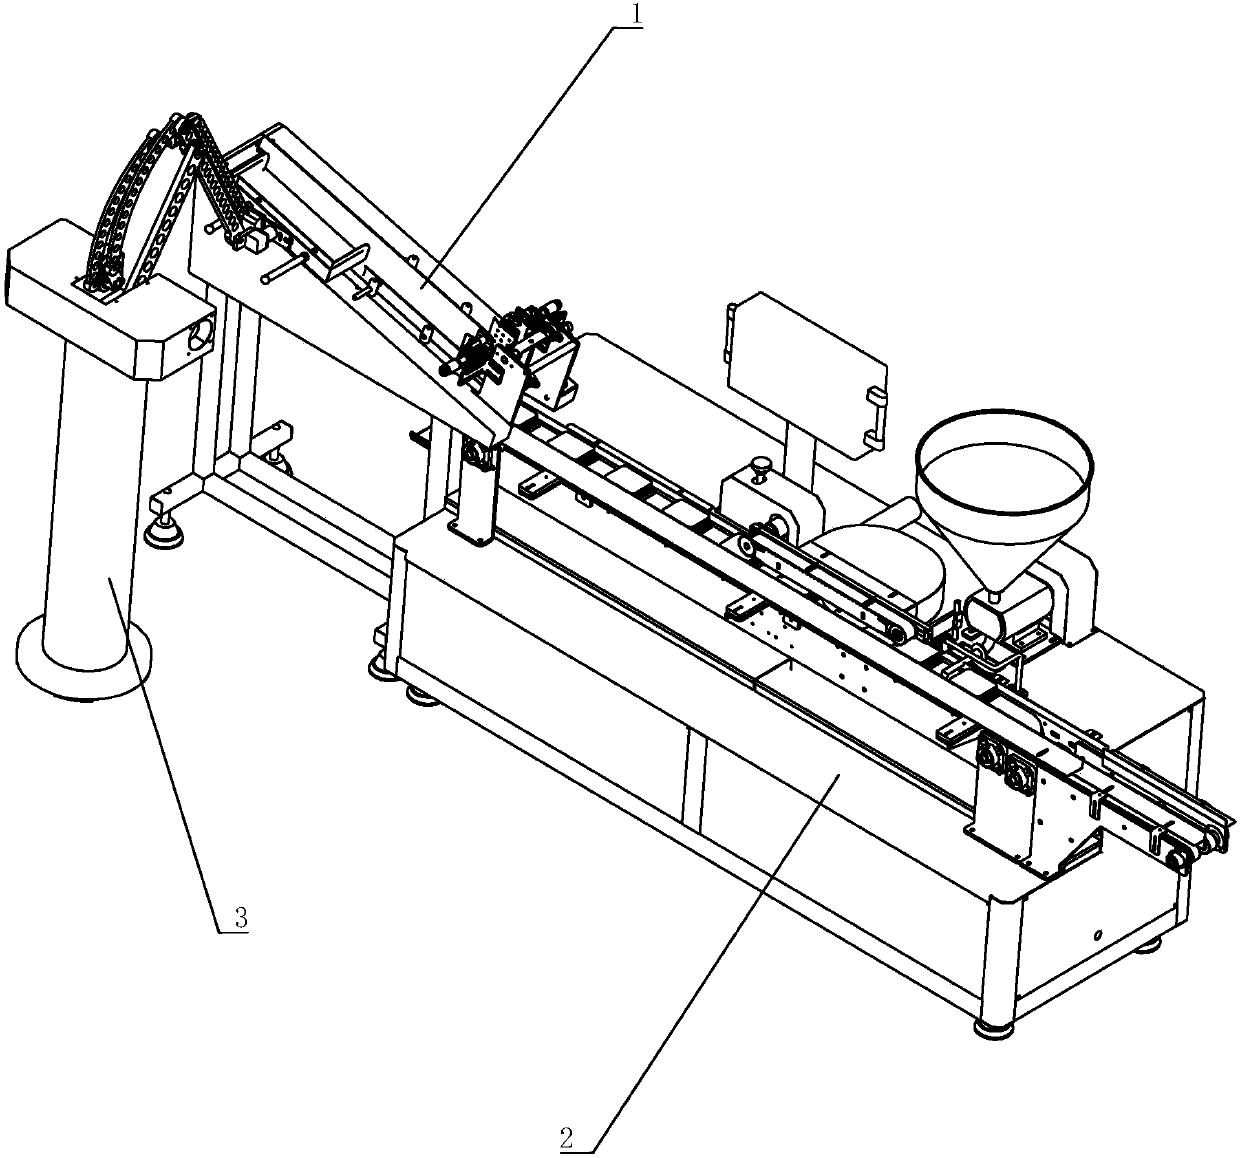 Full-automatic cutting and filling injecting machine for sandwiches